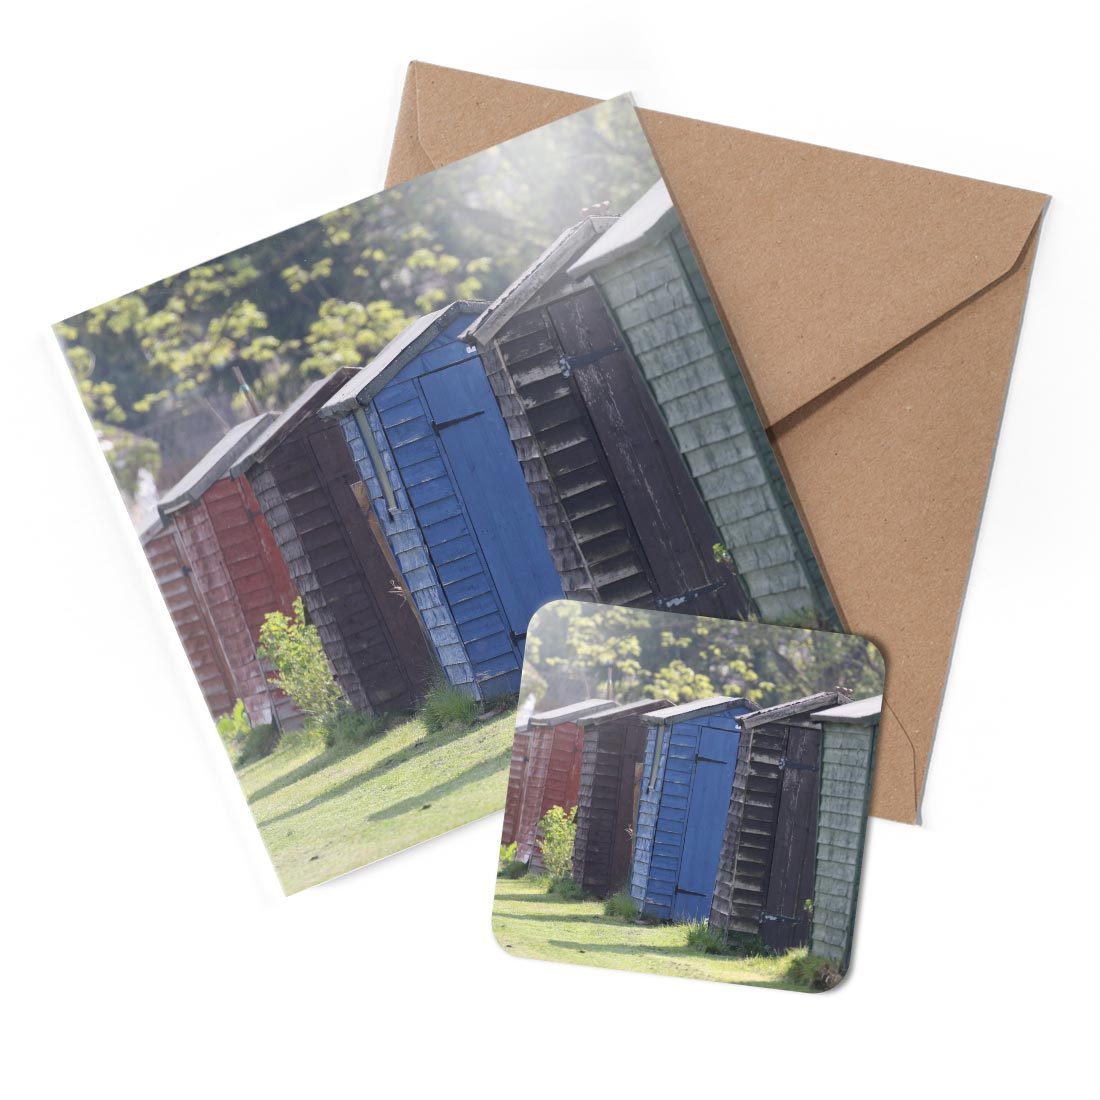 1 x Greeting Card & Coaster Set - Colourful Allotment Sheds Garden #50573